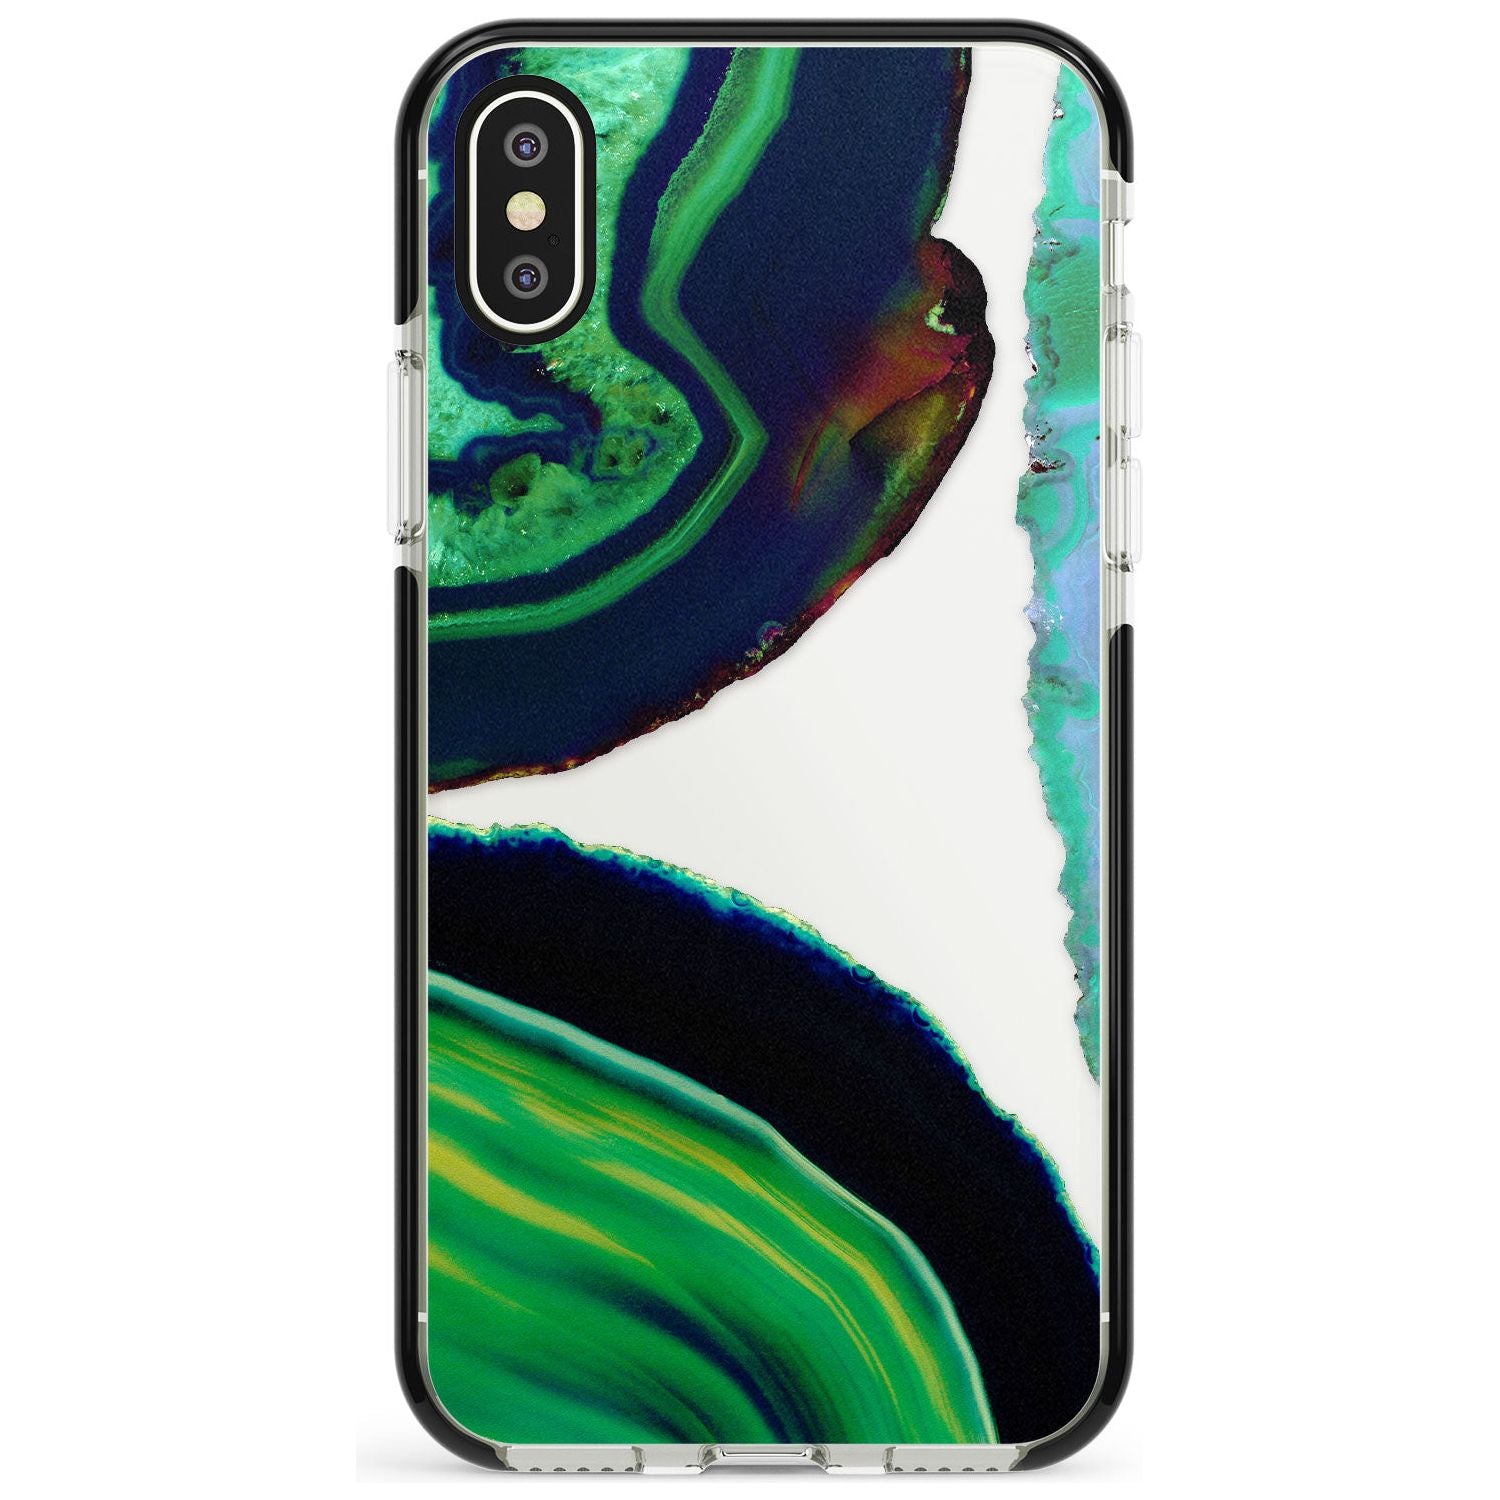 Green & Navy Gemstone Crystal Clear Design Black Impact Phone Case for iPhone X XS Max XR